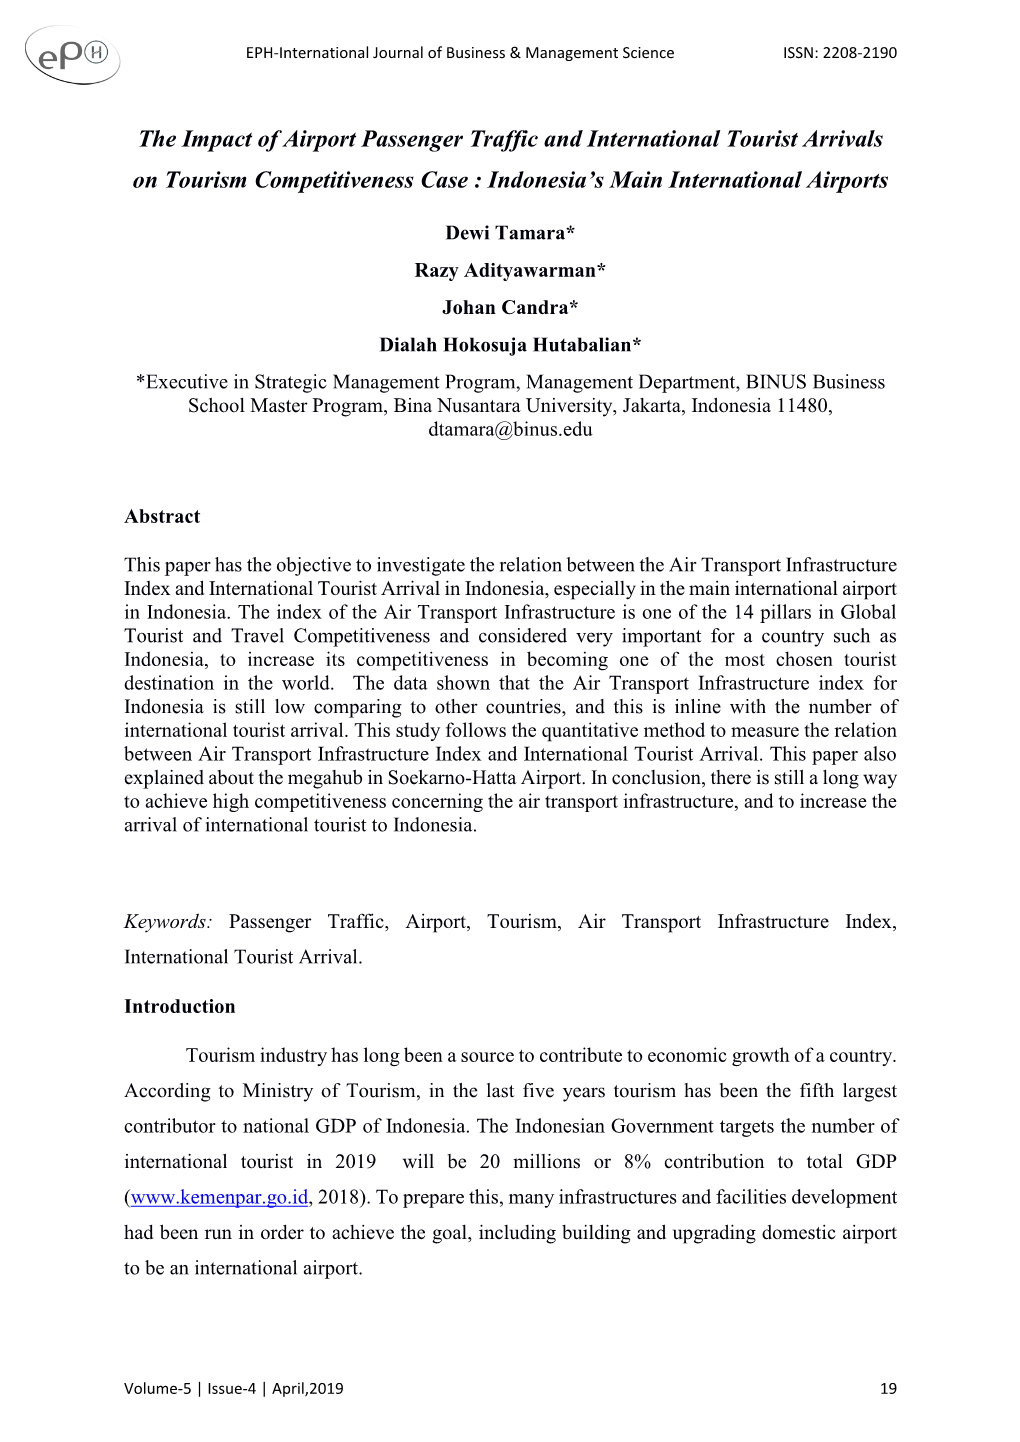 The Impact of Airport Passenger Traffic and International Tourist Arrivals on Tourism Competitiveness Case : Indonesia’S Main International Airports